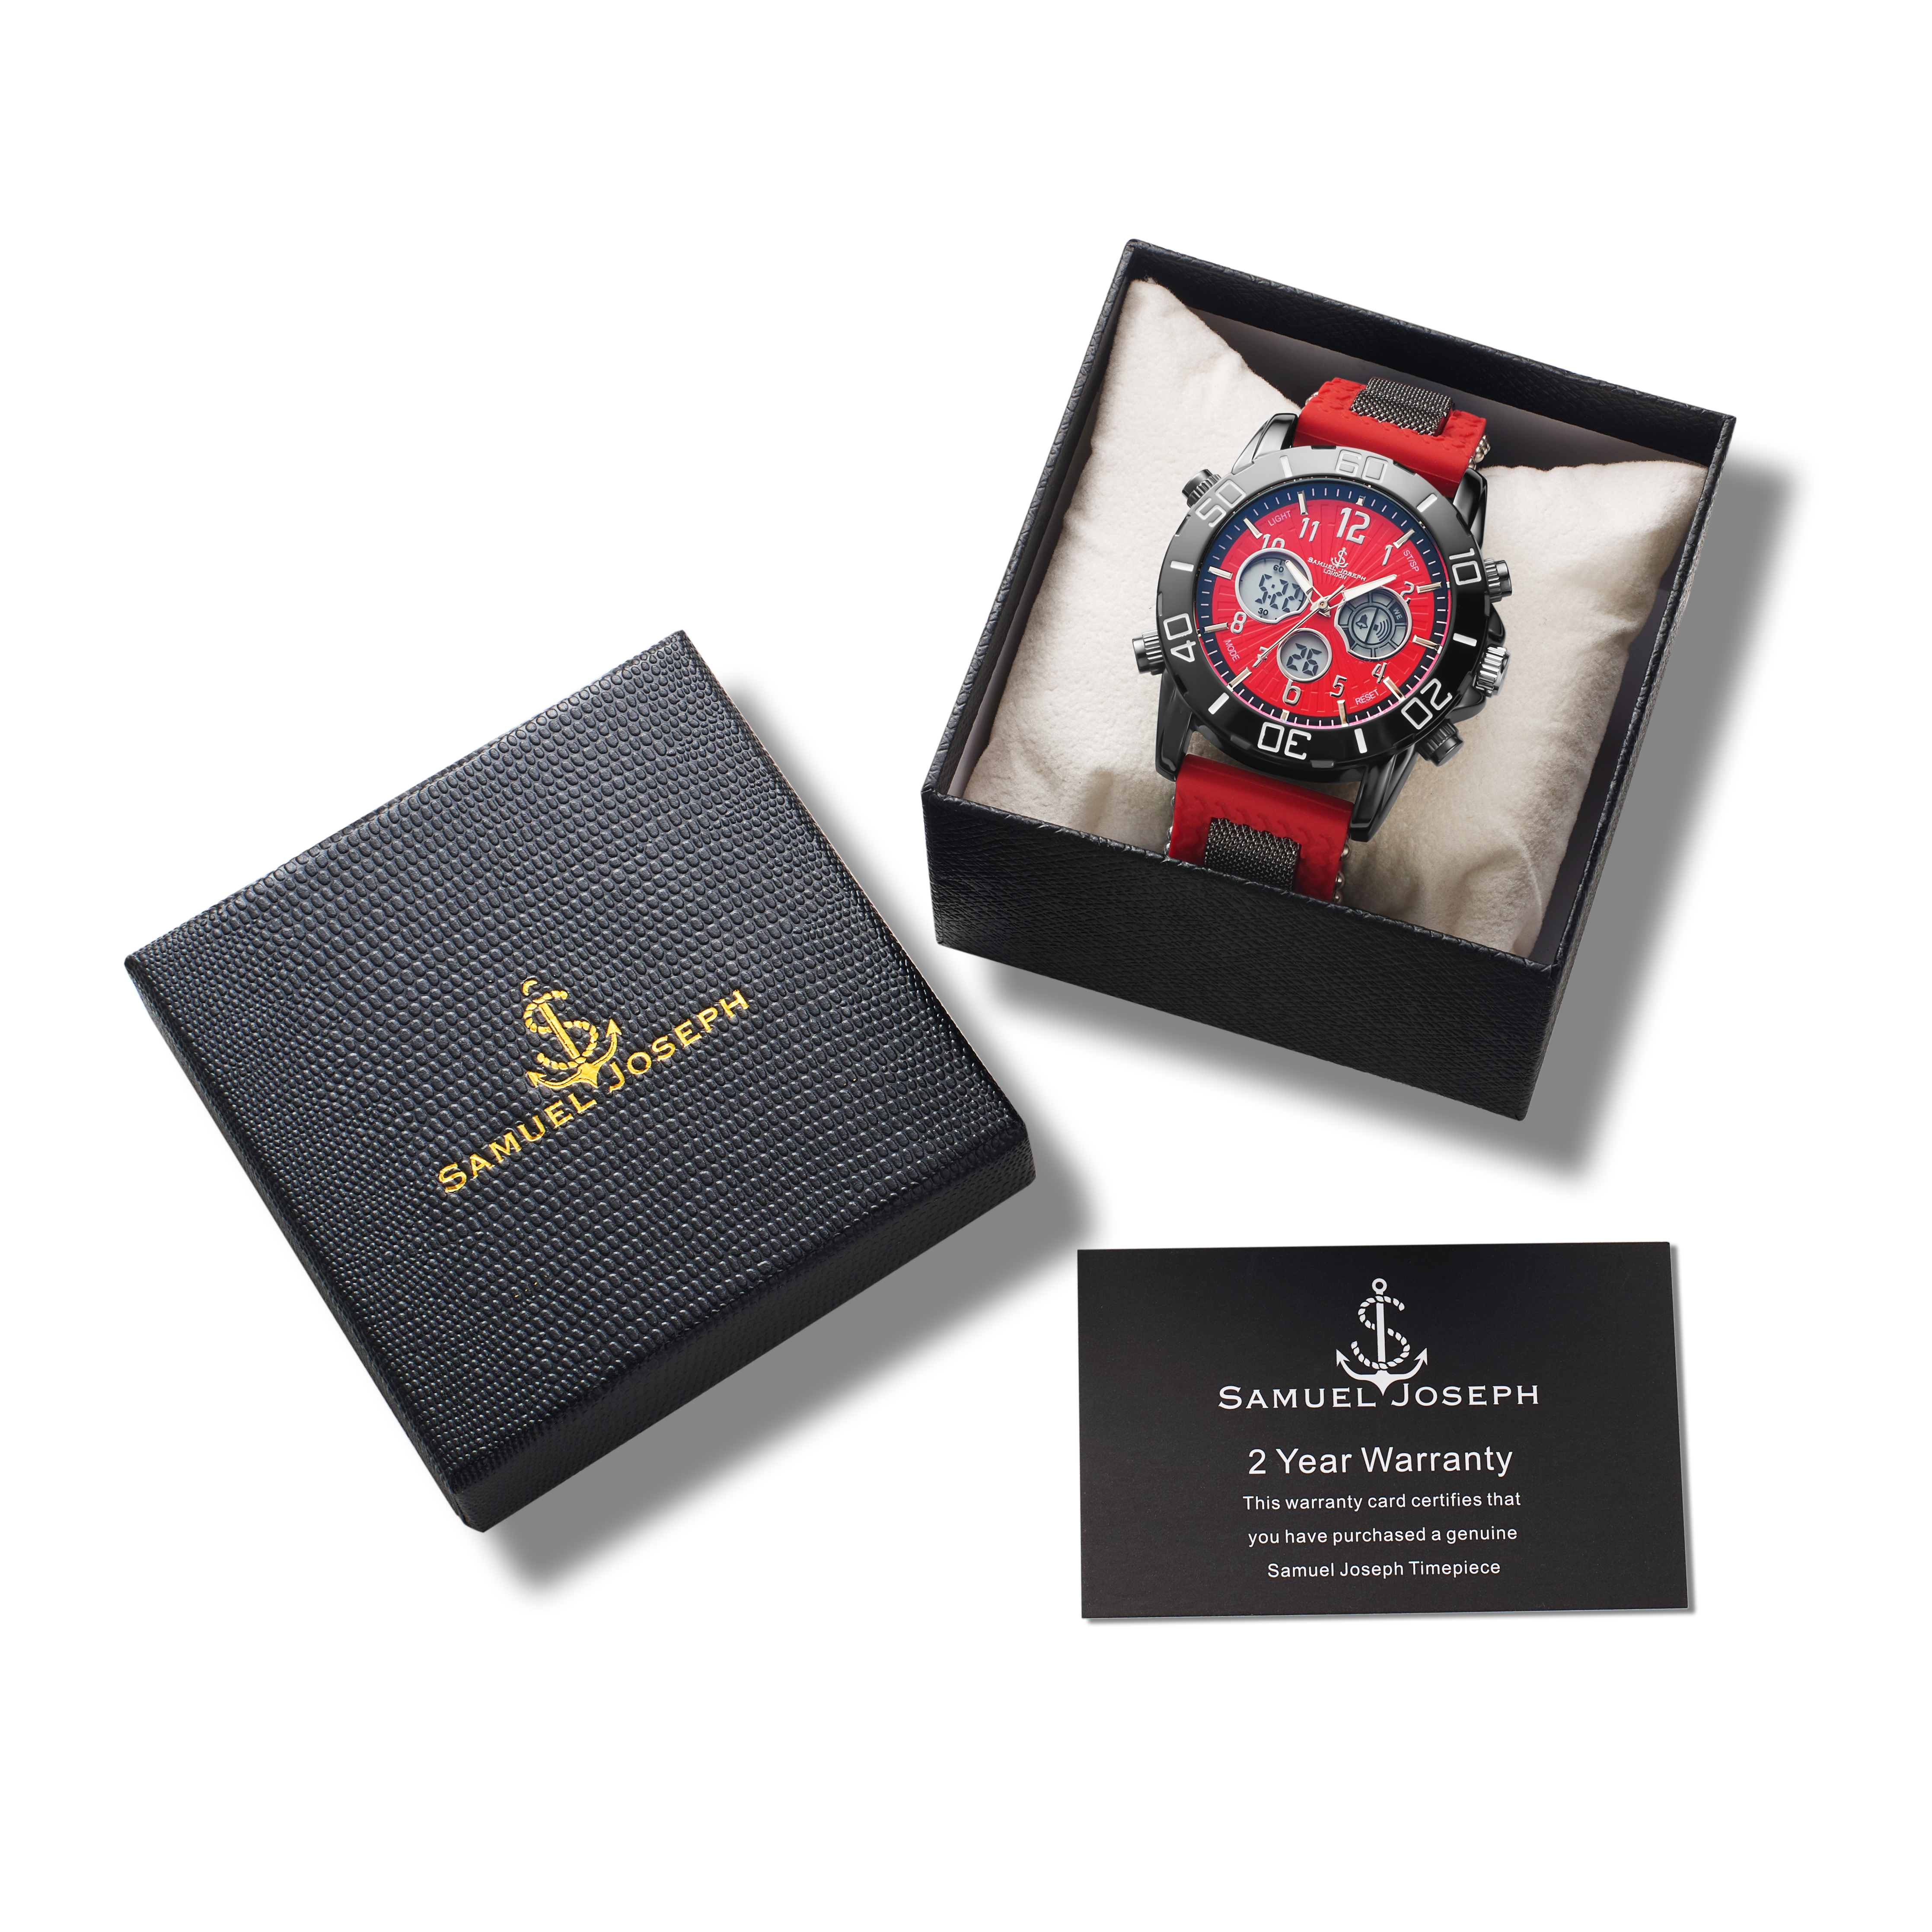 Samuel Joseph Limited Edition Multi Functional Red Mens Watch - Free Delivery & 2 Year Warranty - Image 5 of 5